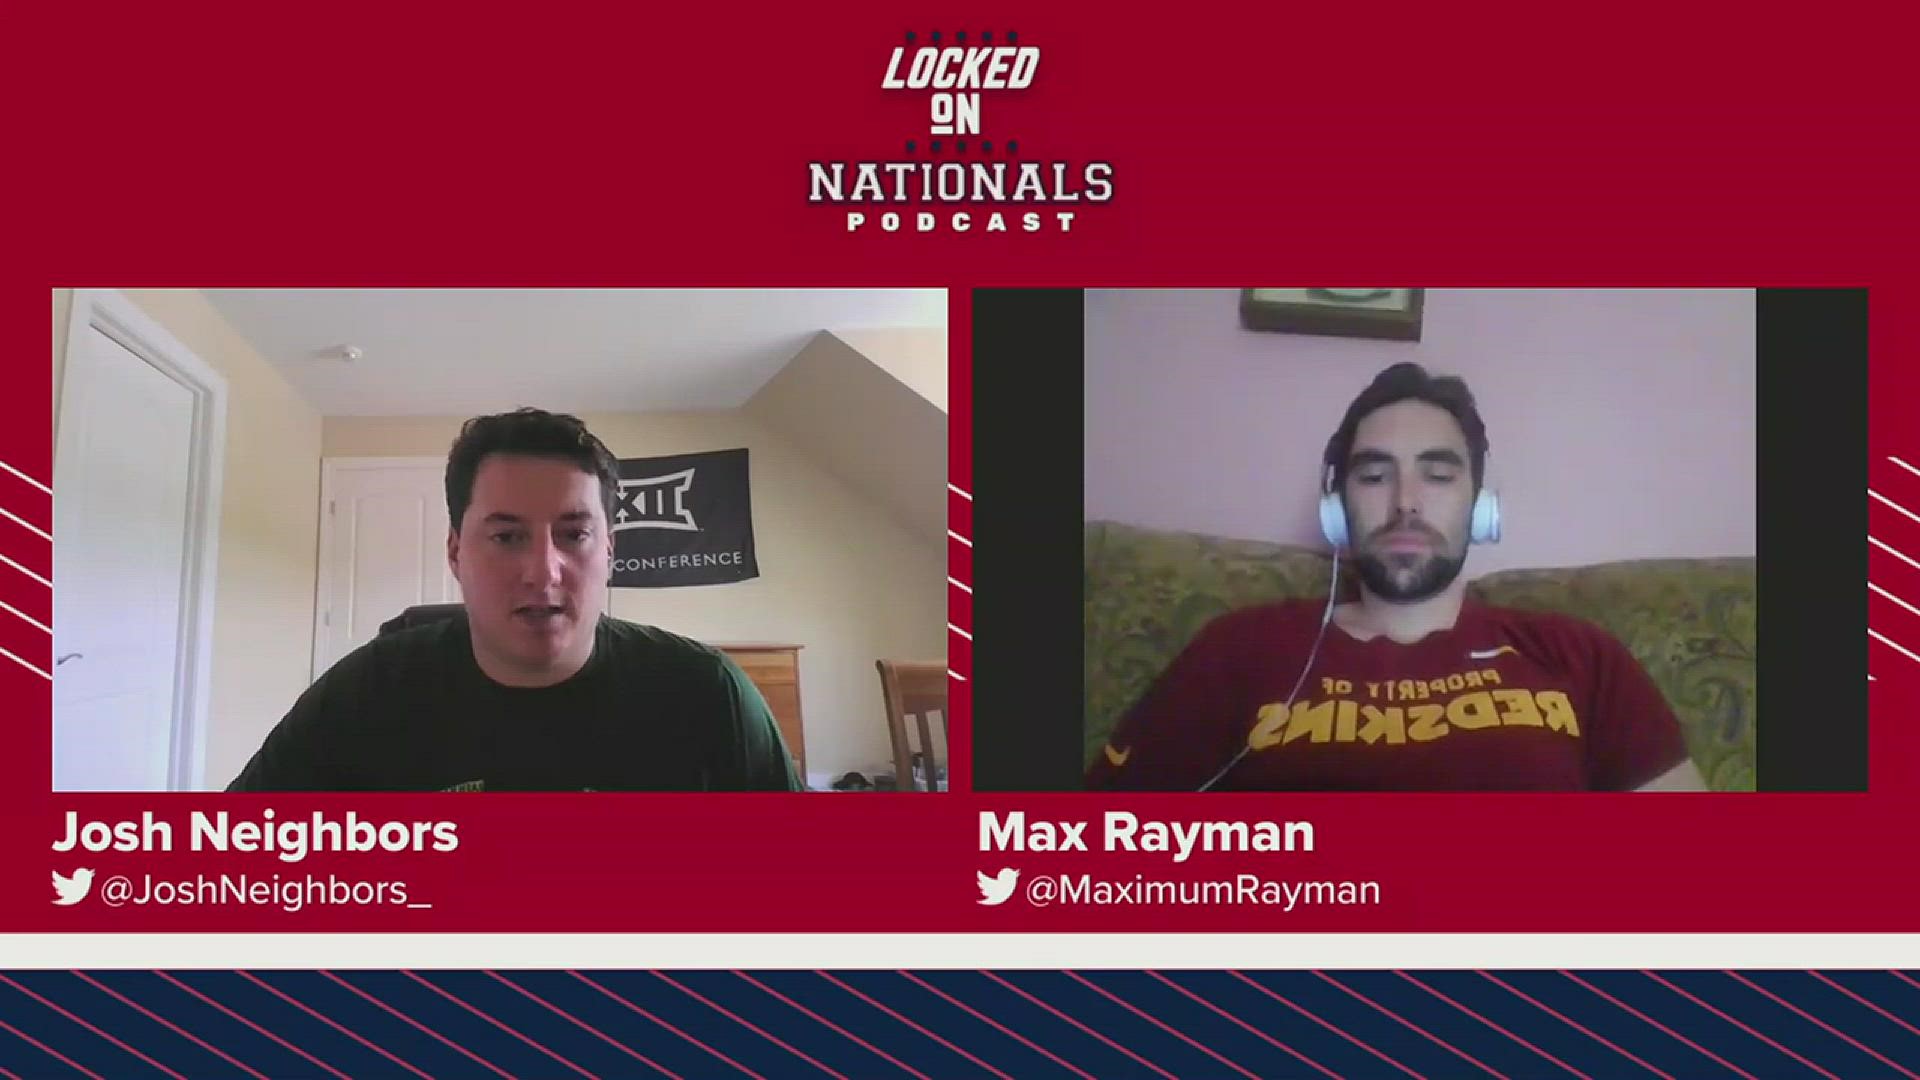 How did Washington do in the MLB Draft? The Locked On Natiojals podcast goes over the top five picks for the team.